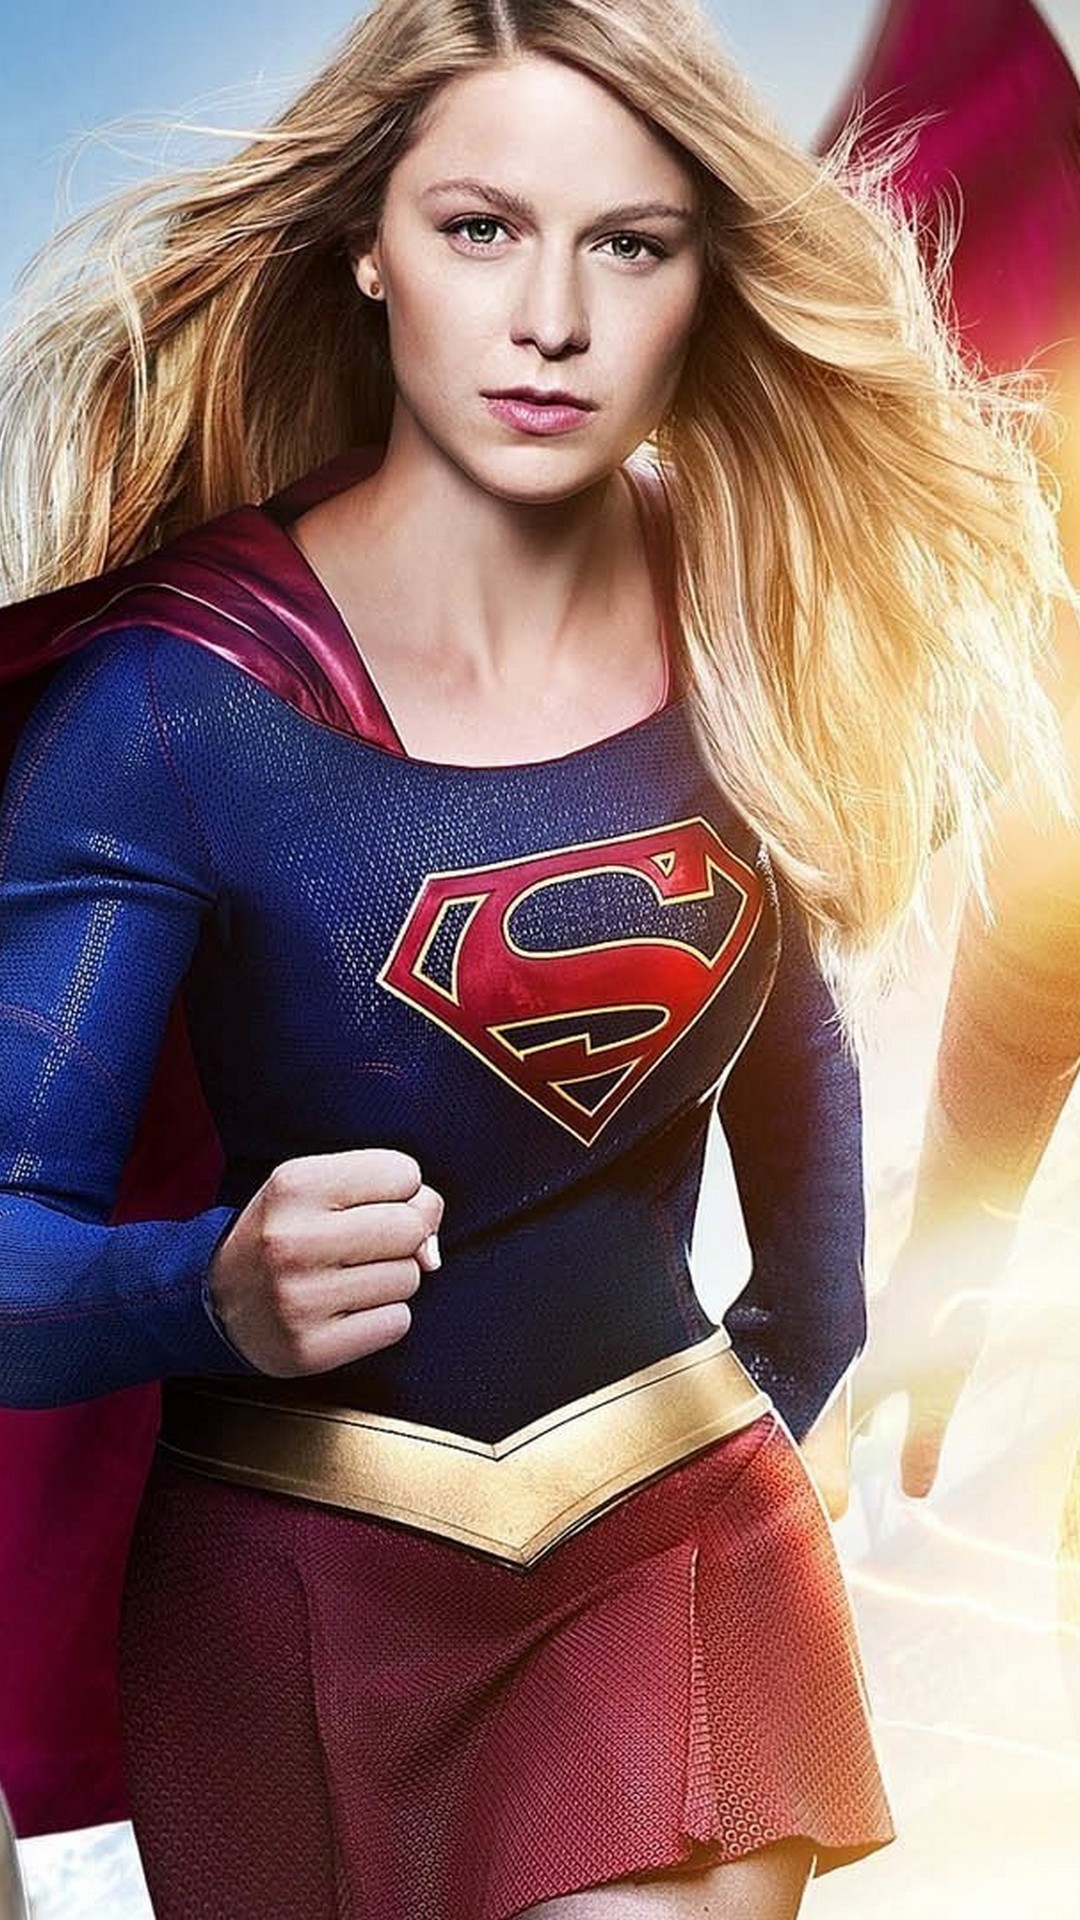 Supergirl iPhone X Wallpaper HD with high-resolution 1080x1920 pixel. Download all Mobile Wallpapers and Use them as wallpapers for your iPhone, Tablet, iPad, Android and other mobile devices